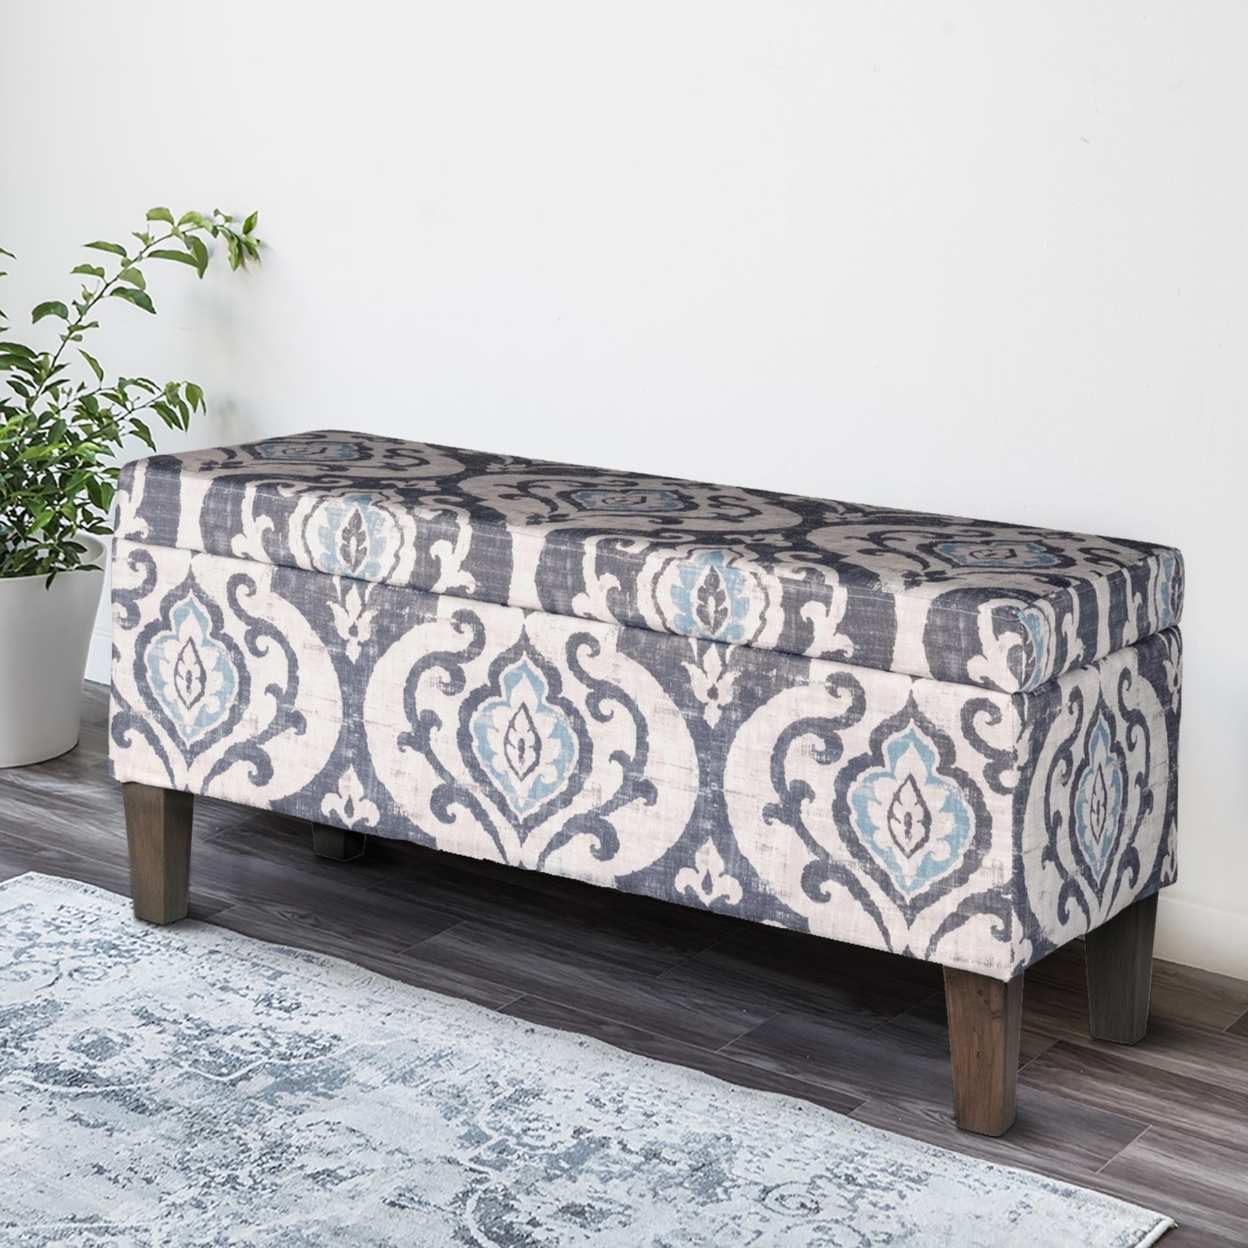 Damask Patterned Fabric Upholstered Wooden Bench With Hinged Storage, Large, Multicolor- Saltoro Sherpi